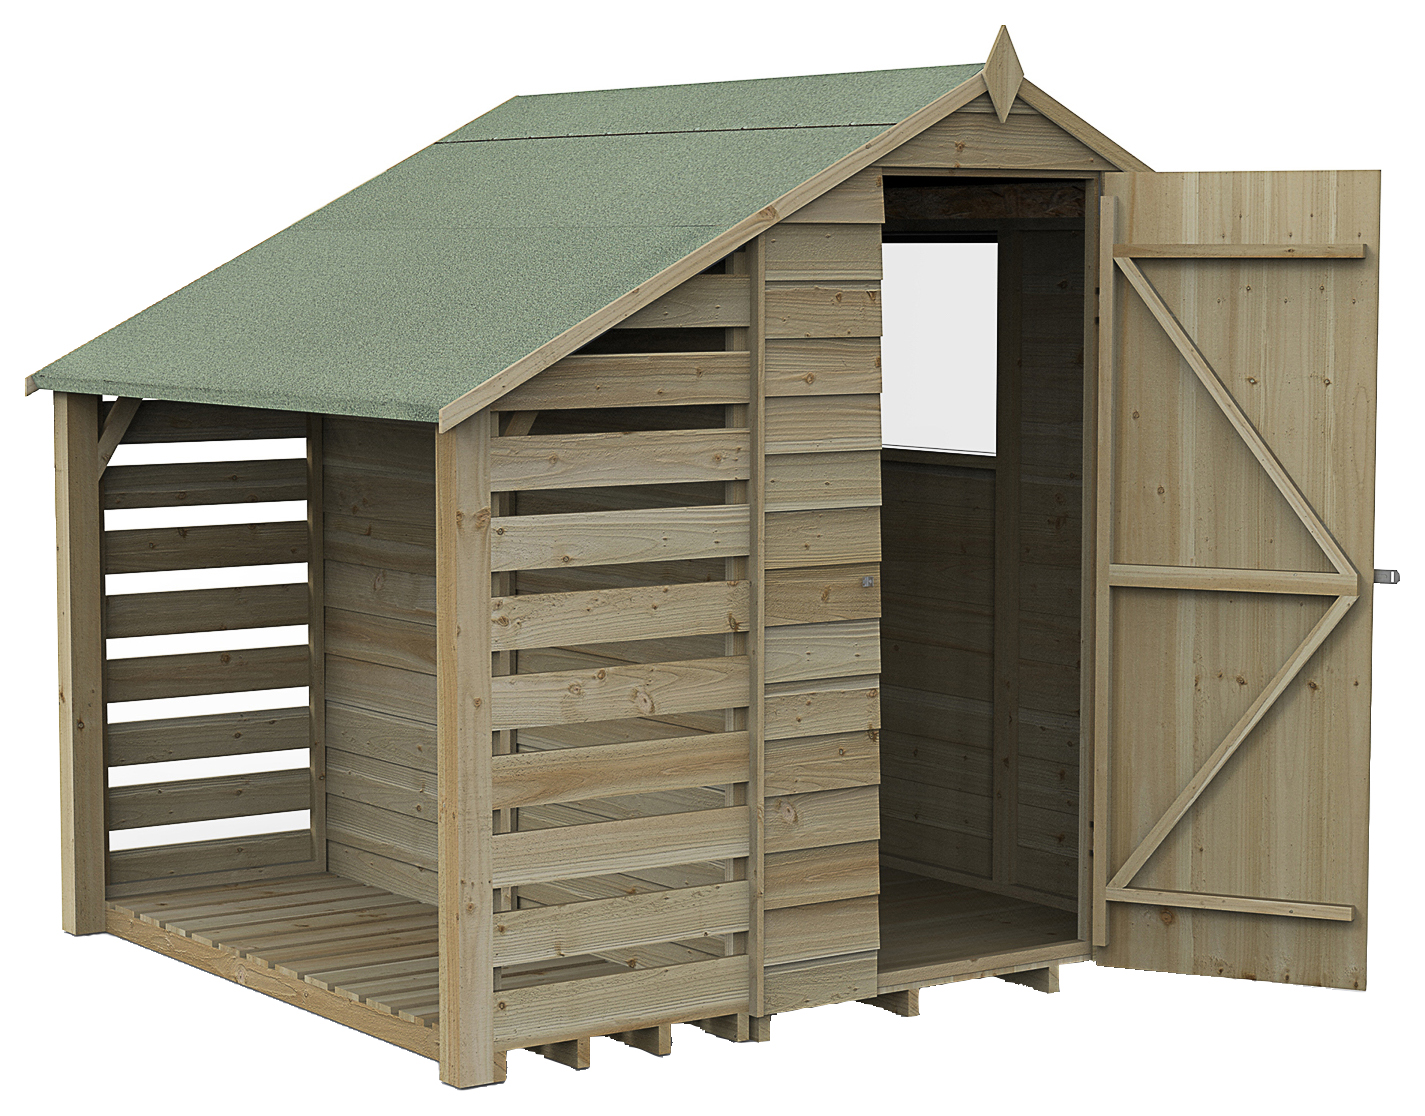 Forest Garden 6 x 4ft 4Life Apex Overlap Pressure Treated Windowless Shed with Lean-To